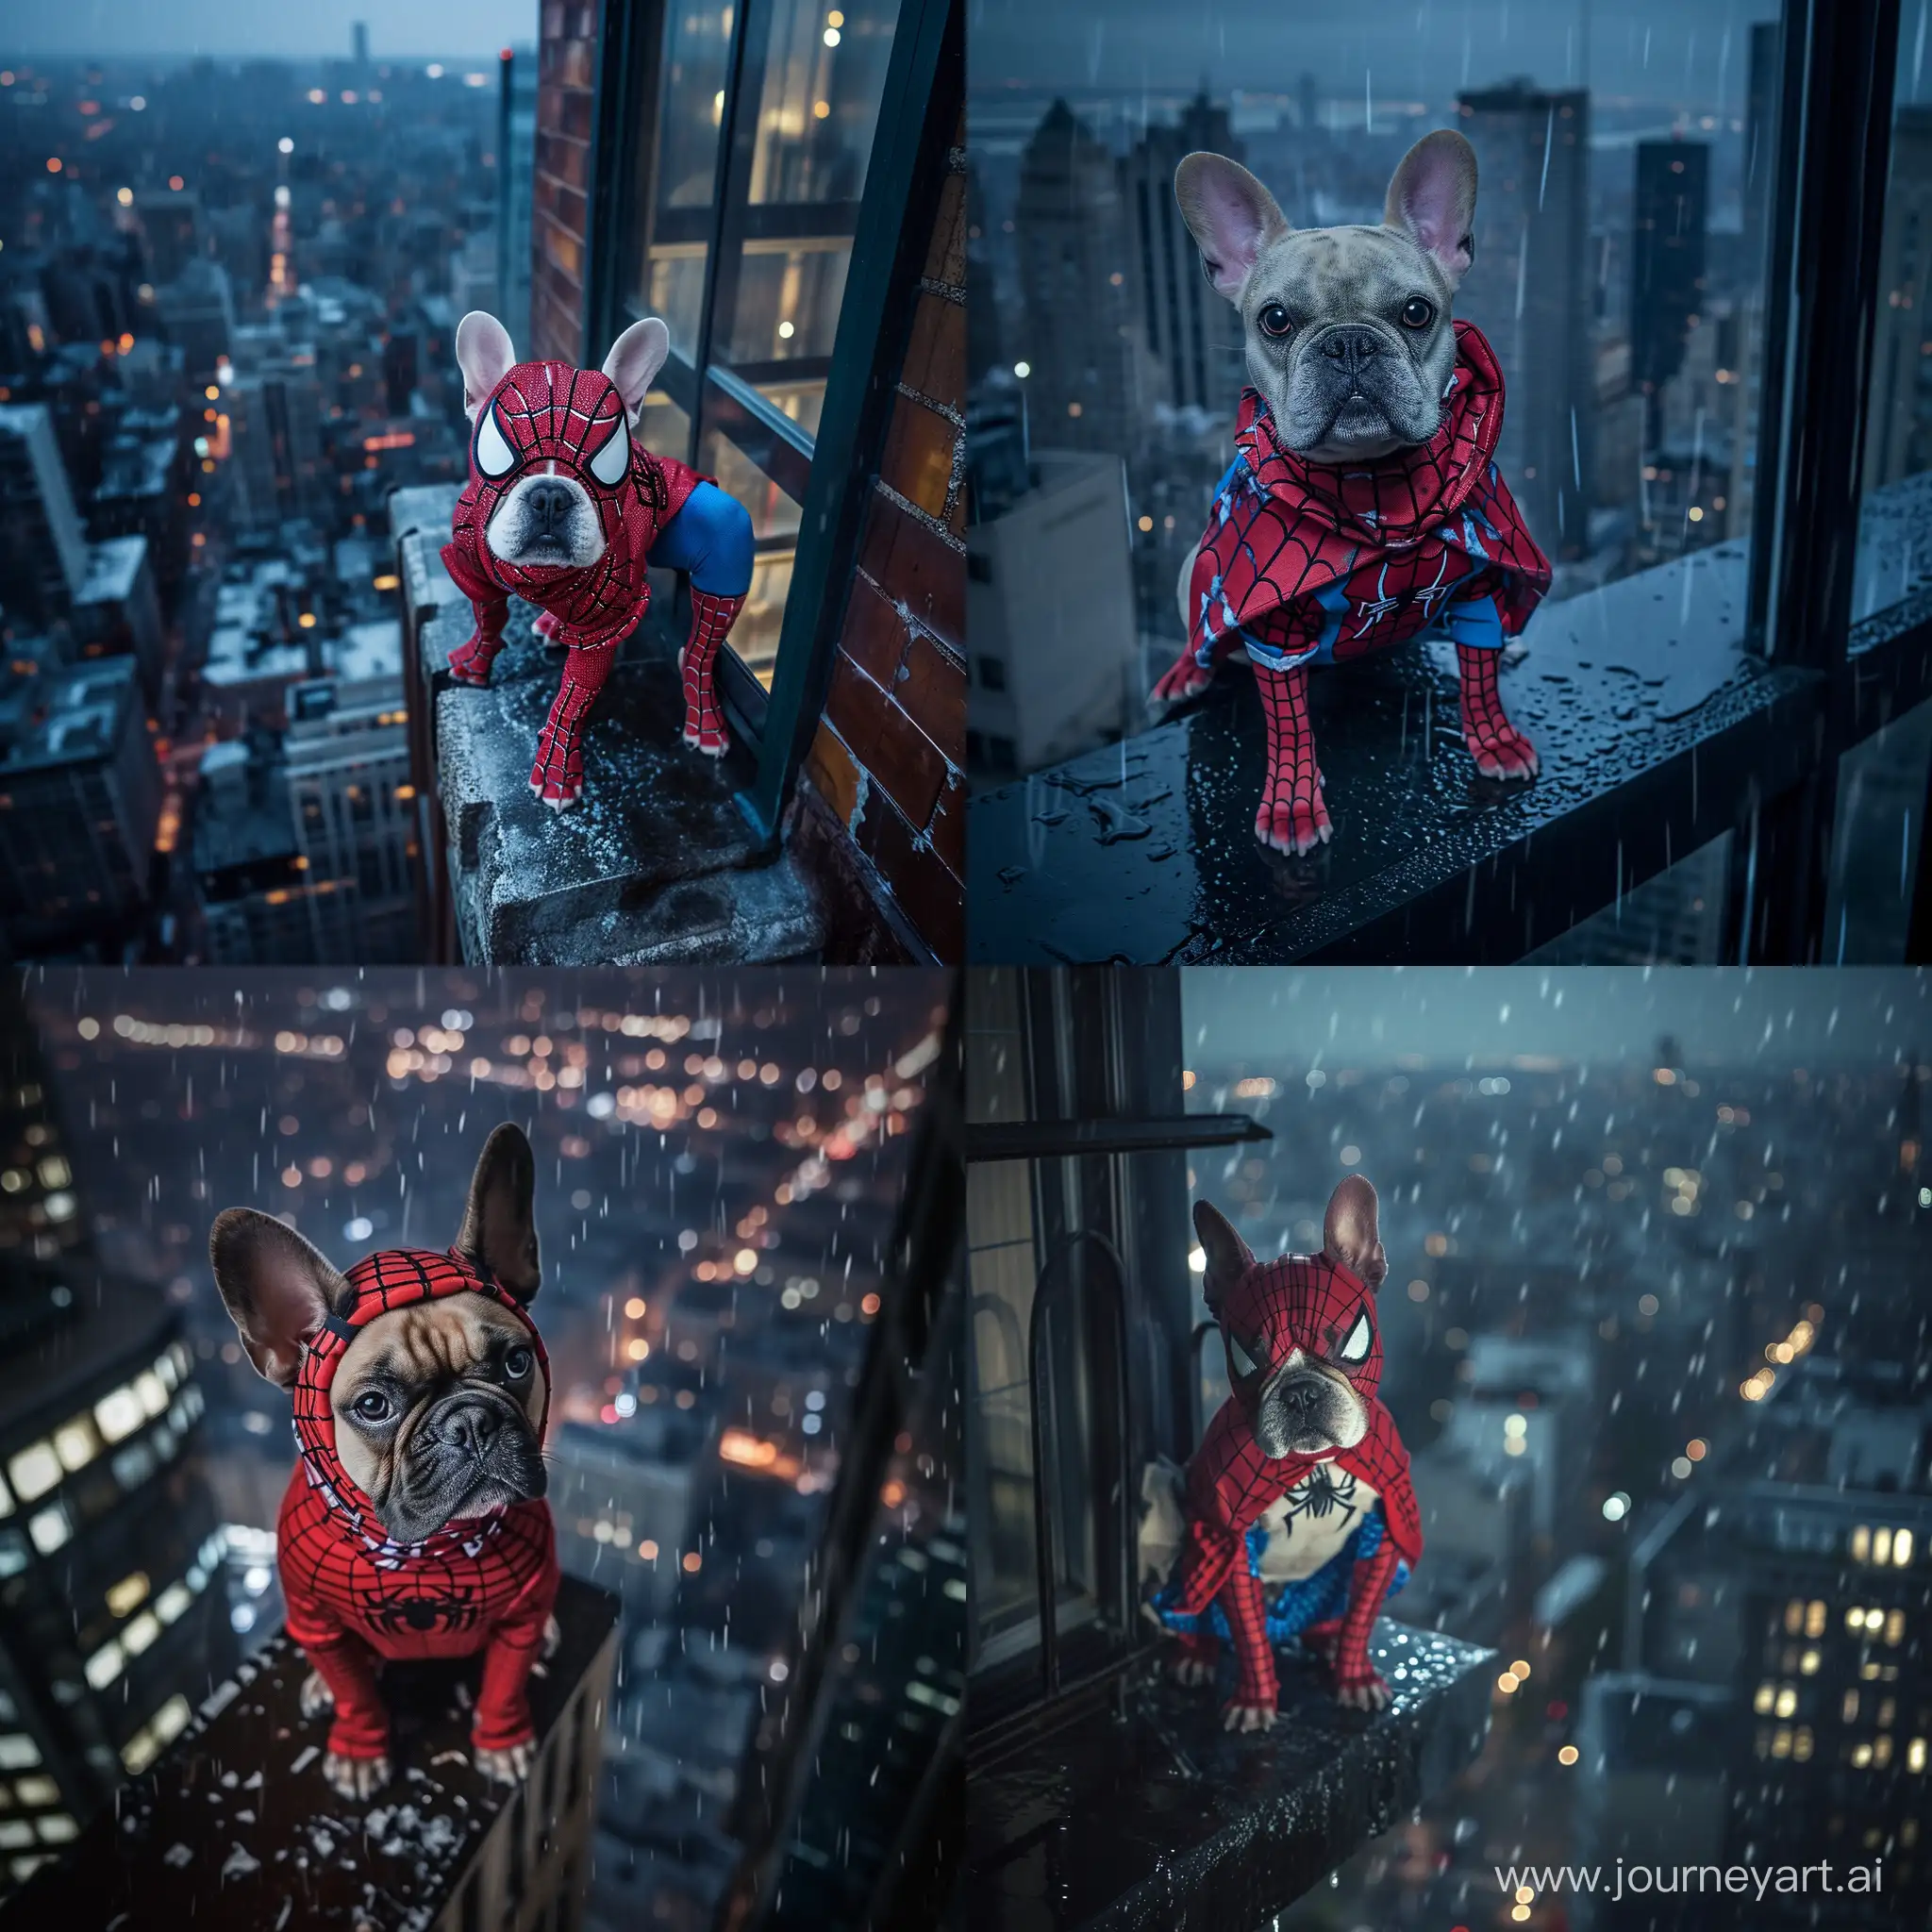 Pied French bulldog dress as Spiderman on a high building in a rainy night